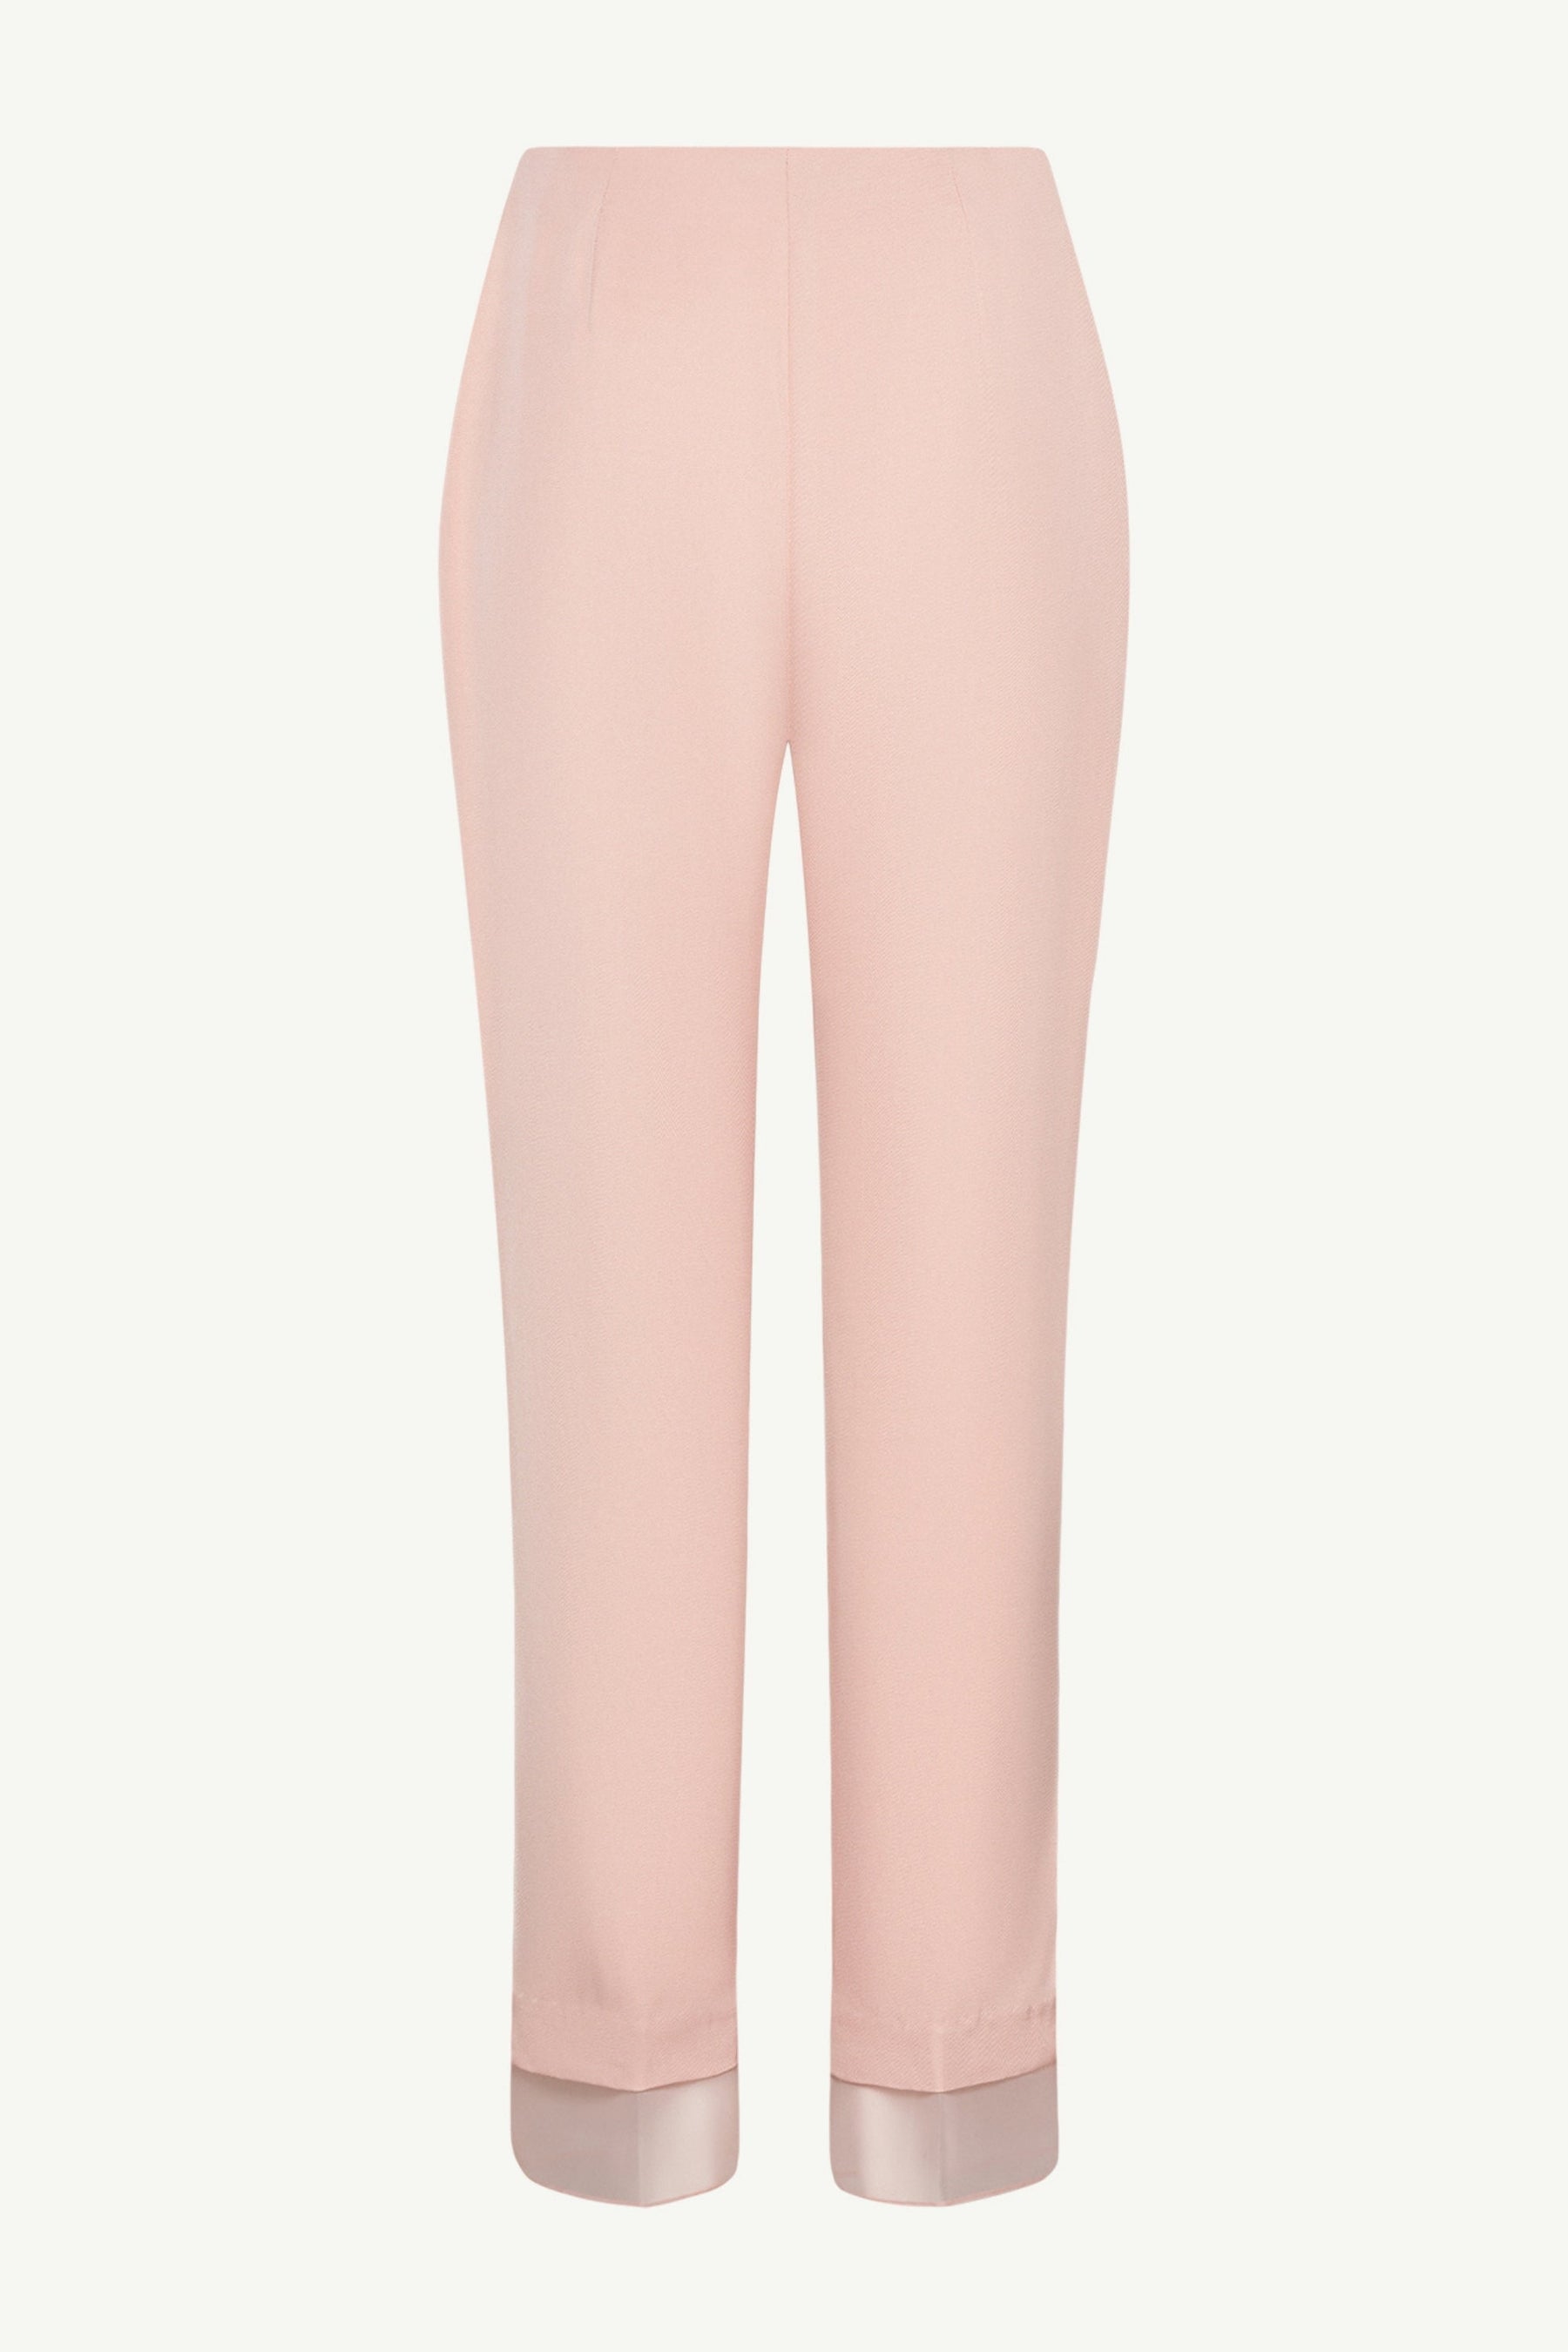 Rayan Organza Trim Trousers - Sepia Rose Clothing Veiled 